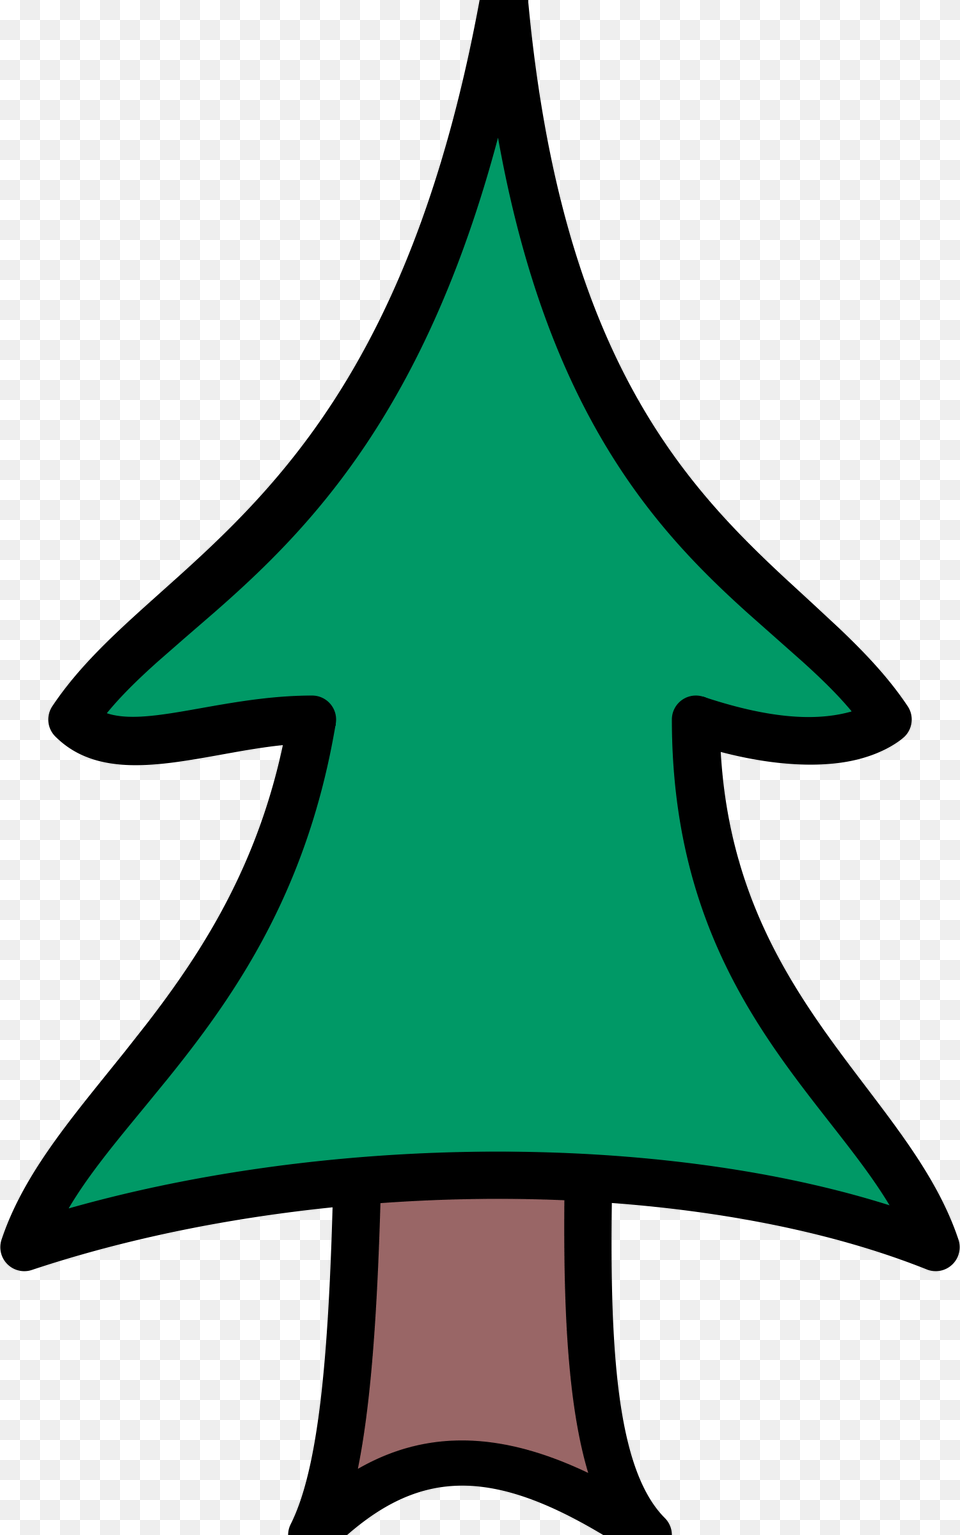 Cartoon Conifer Tree Pine Tree Drawing Vector Clipart Image, Leaf, Plant Png